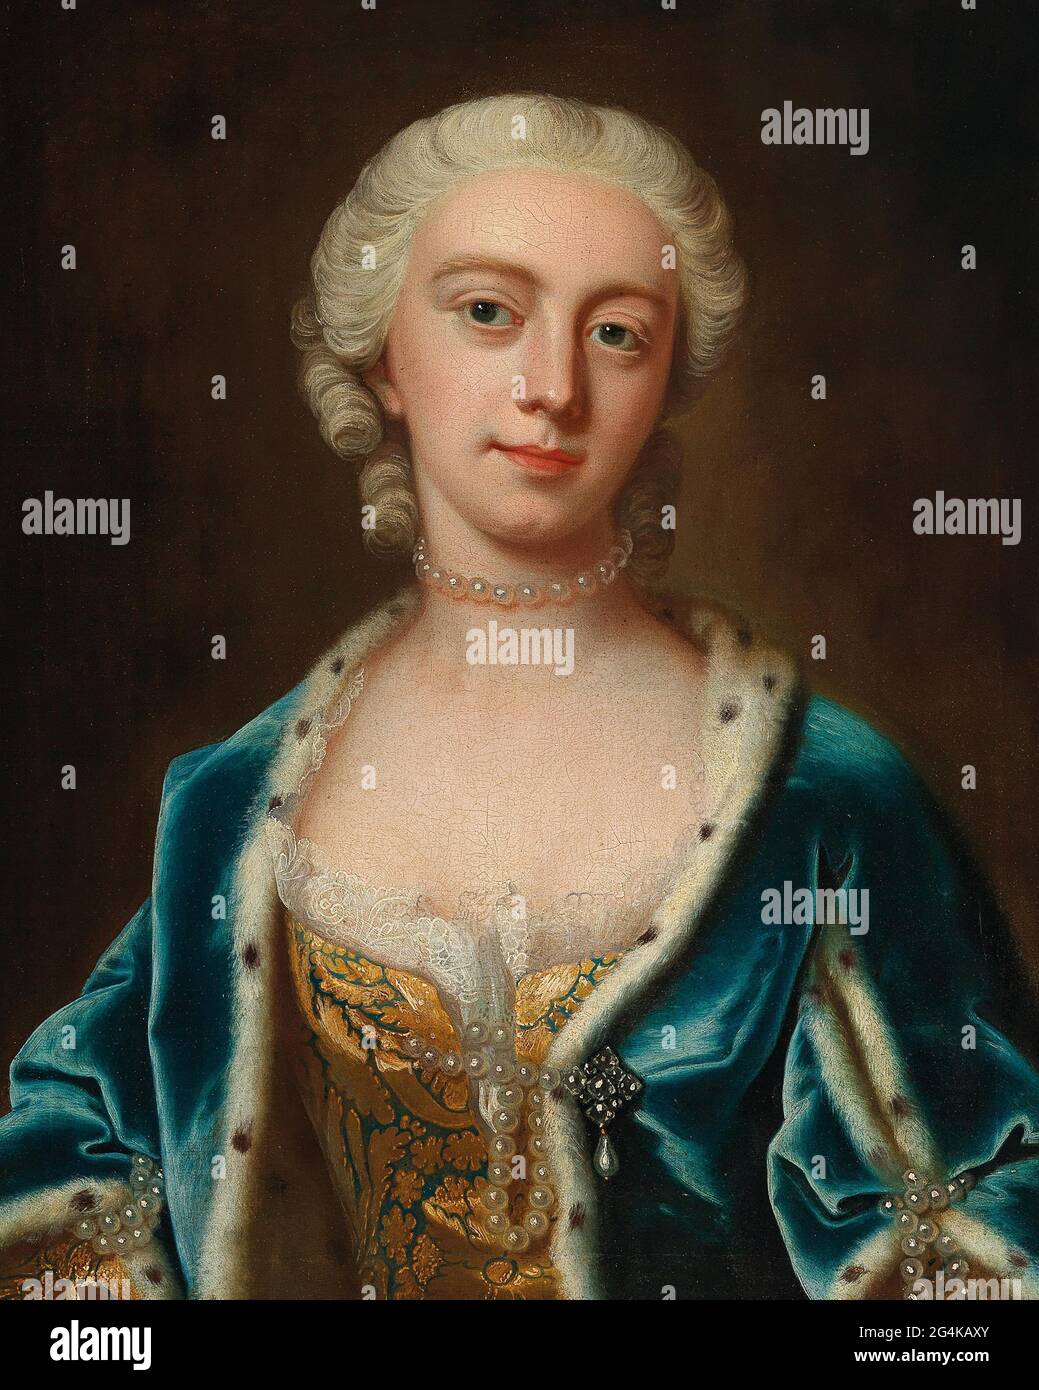 Portrait of  Augusta of Saxe-Gotha (1719-1772), Princess of Wales, Mid of the 18th cen. Private Collection. Stock Photo